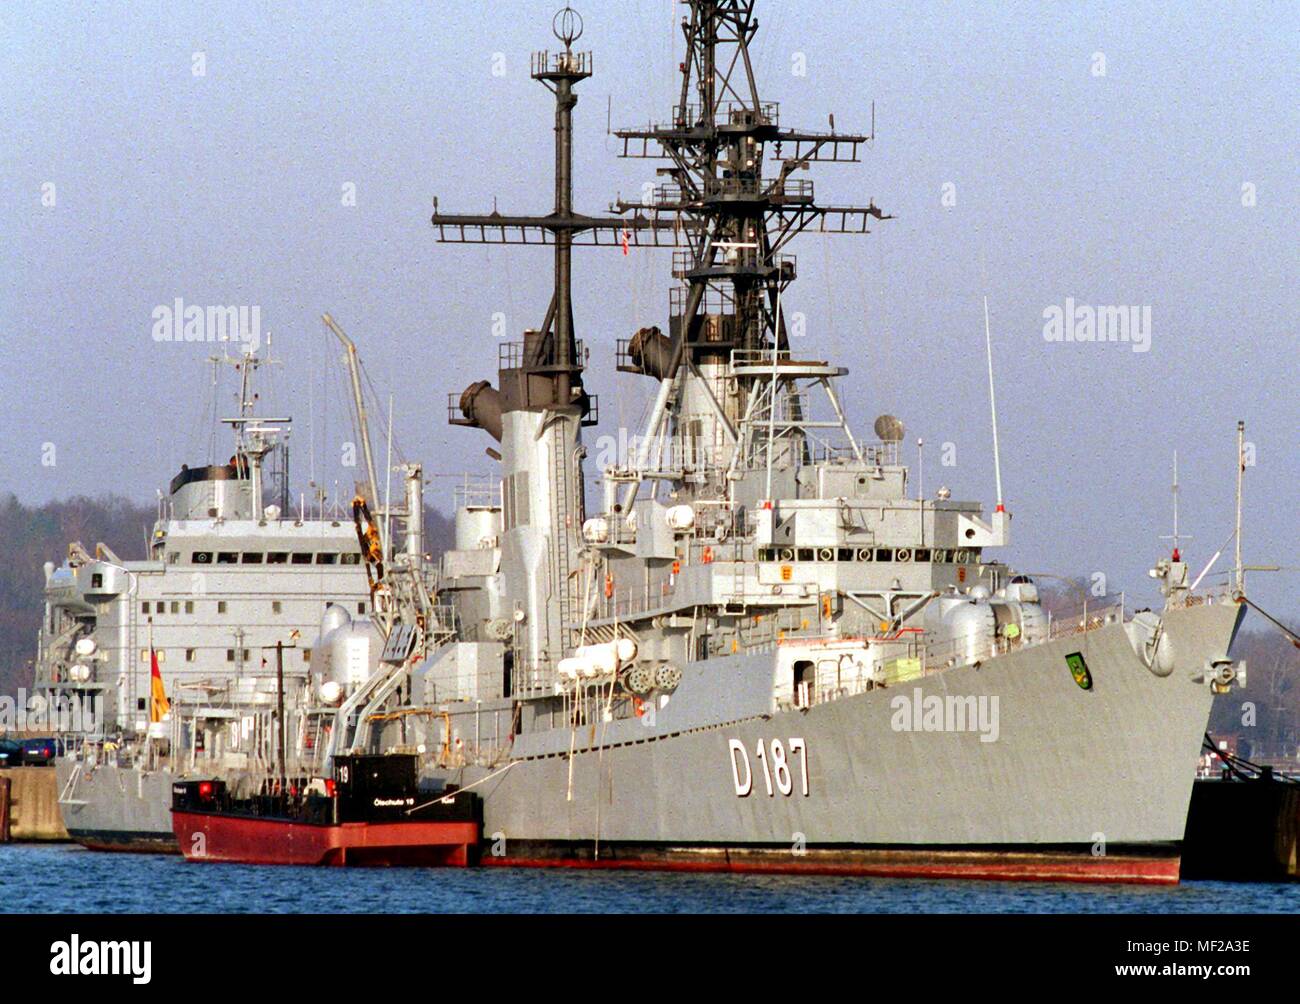 The 30-year-old destroyer 'Rommel' is on January 18, 1999 in his home base Kiel. The United States-built Lutjens-class bomber had been modernized in the 1980s, with core weapons of arming ship/air and ship/ship and an underwater submarine weapon system. The crew of the 135 meters long and 14 meters wide ship was 330 men. Now the warship, which had already been taken out of service at the end of September 1998, will be partially dismantled and prepared for official withdrawal from service. | usage worldwide Stock Photo